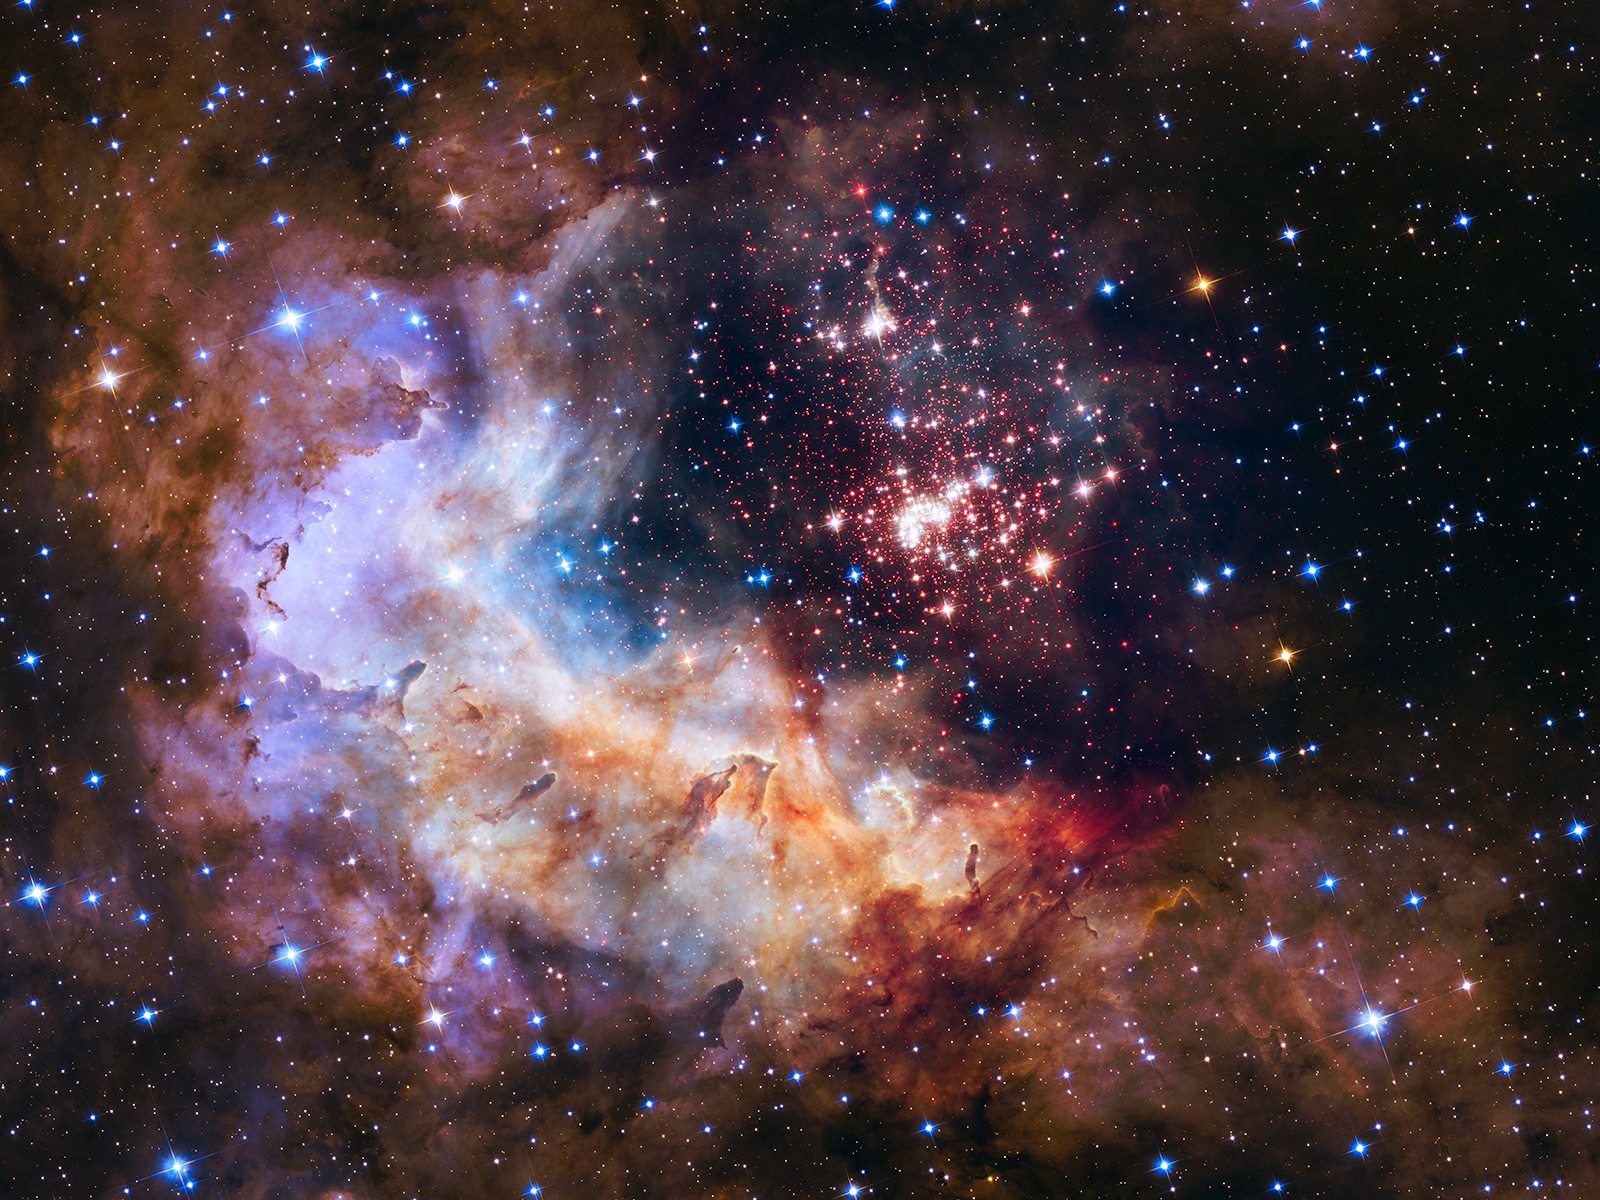 The brilliant tapestry of young stars flaring to life resemble a glittering fireworks display in the 25th anniversary NASA Hubble Space Telescope image, released to commemorate a quarter century of exploring the solar system and beyond since its launch on April 24, 1990.